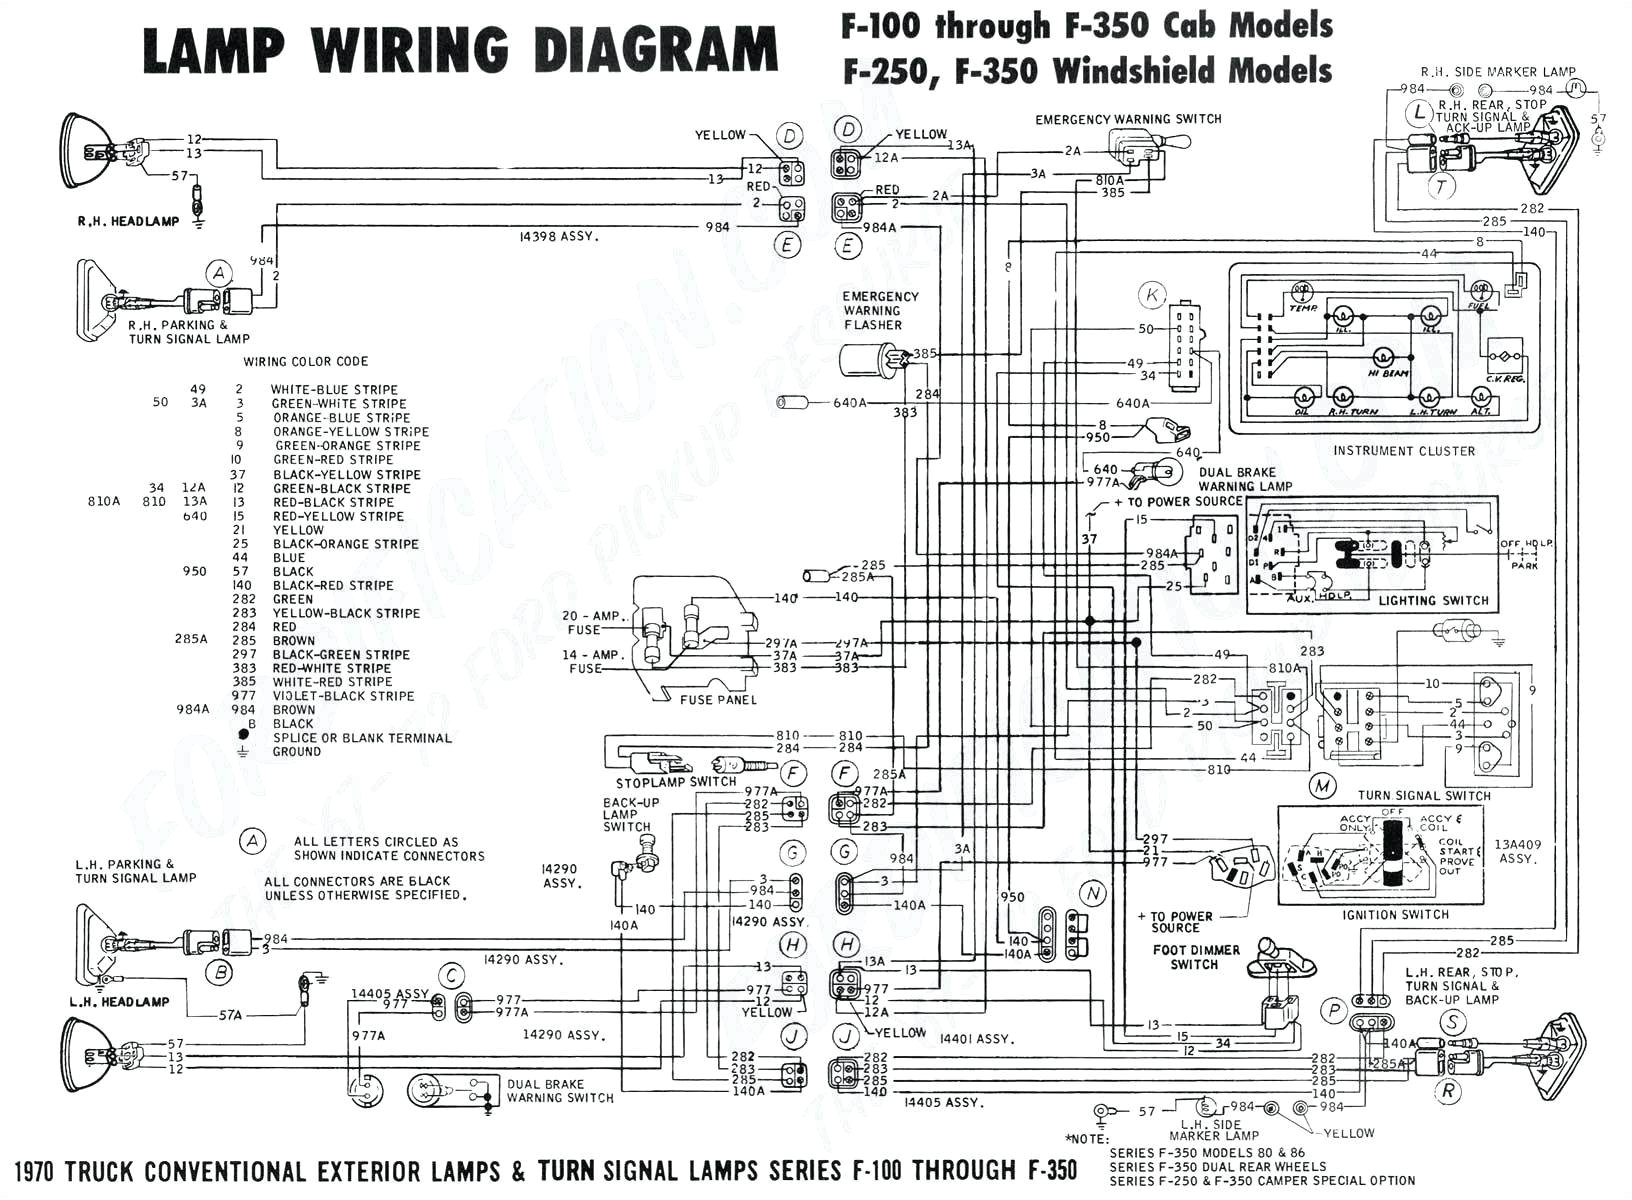 1999 ford Ranger Wiring Diagram Free 99 ford F 150 Wiring Diagram Wiring Diagram Database